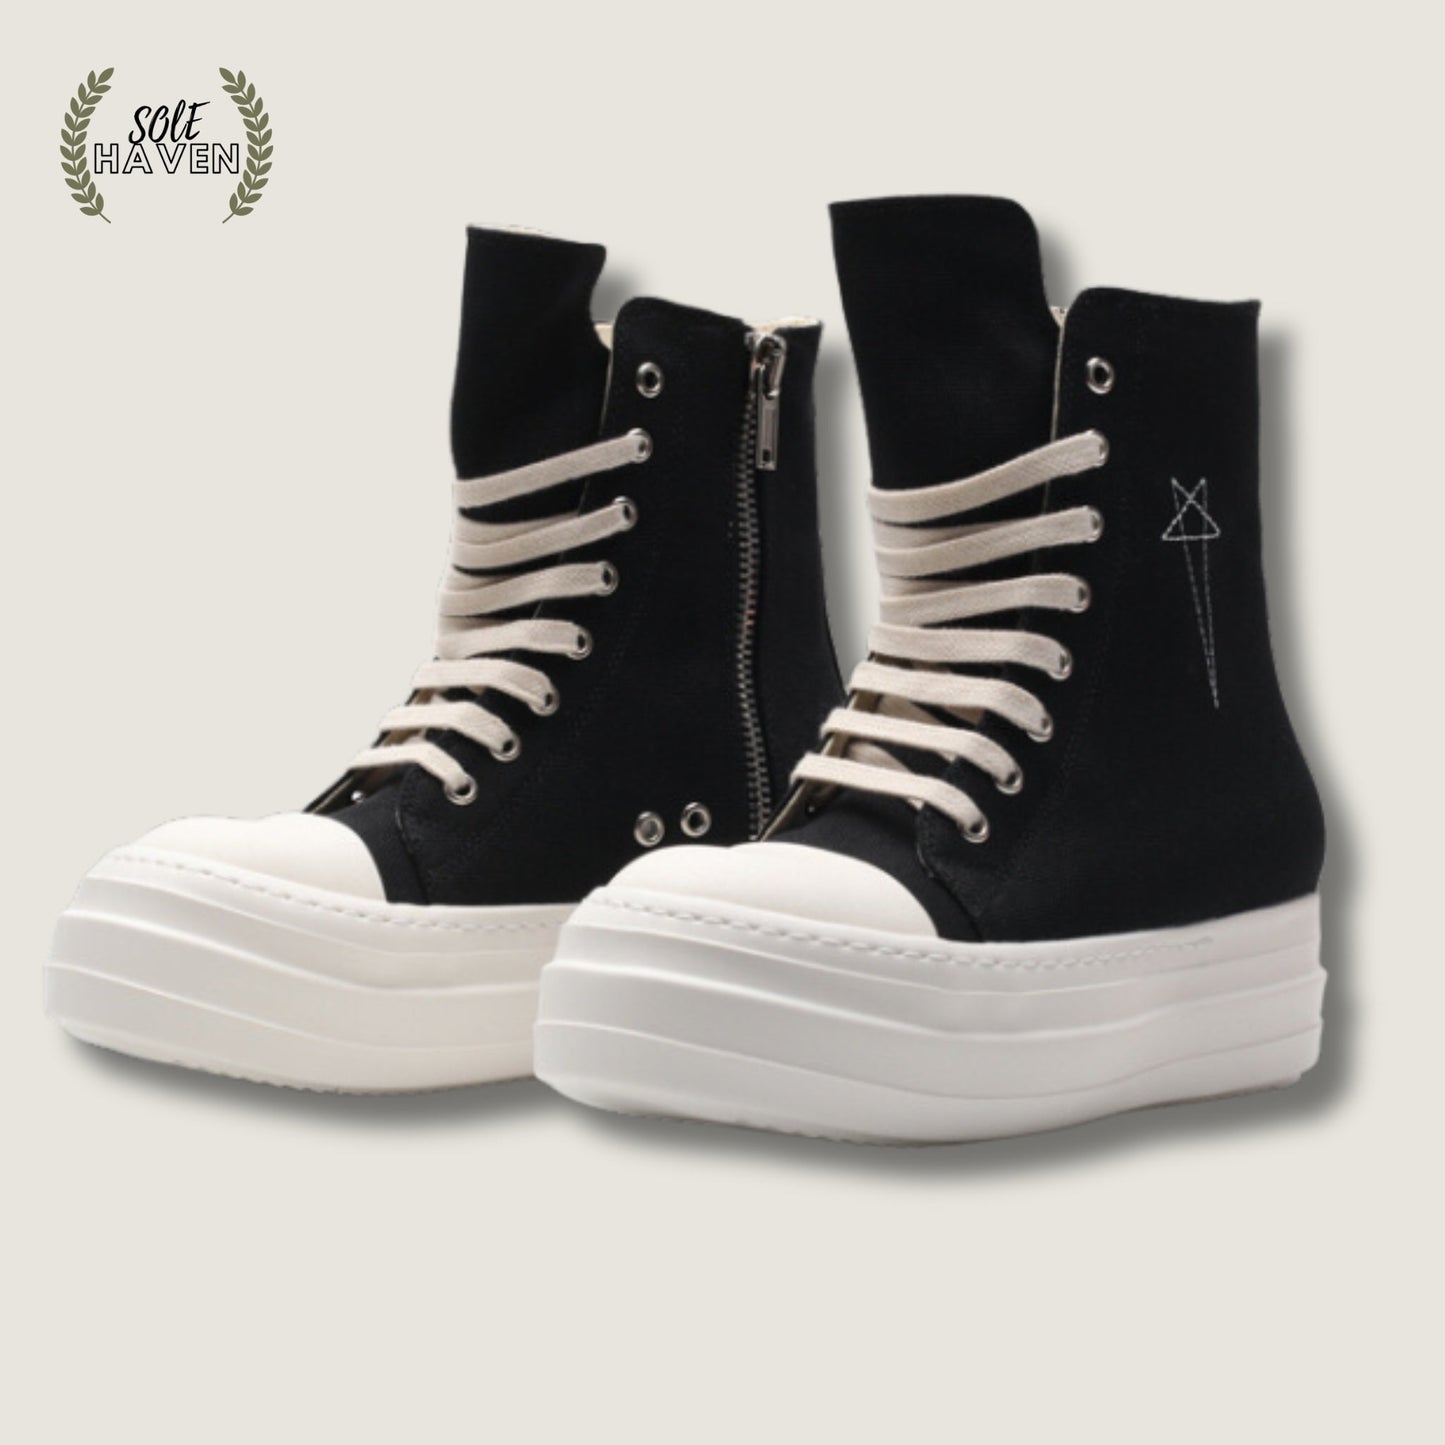 Rick Owens DRKSHDW Abstract High Top 'Embroidered Black' - Sole HavenShoesRick Owens